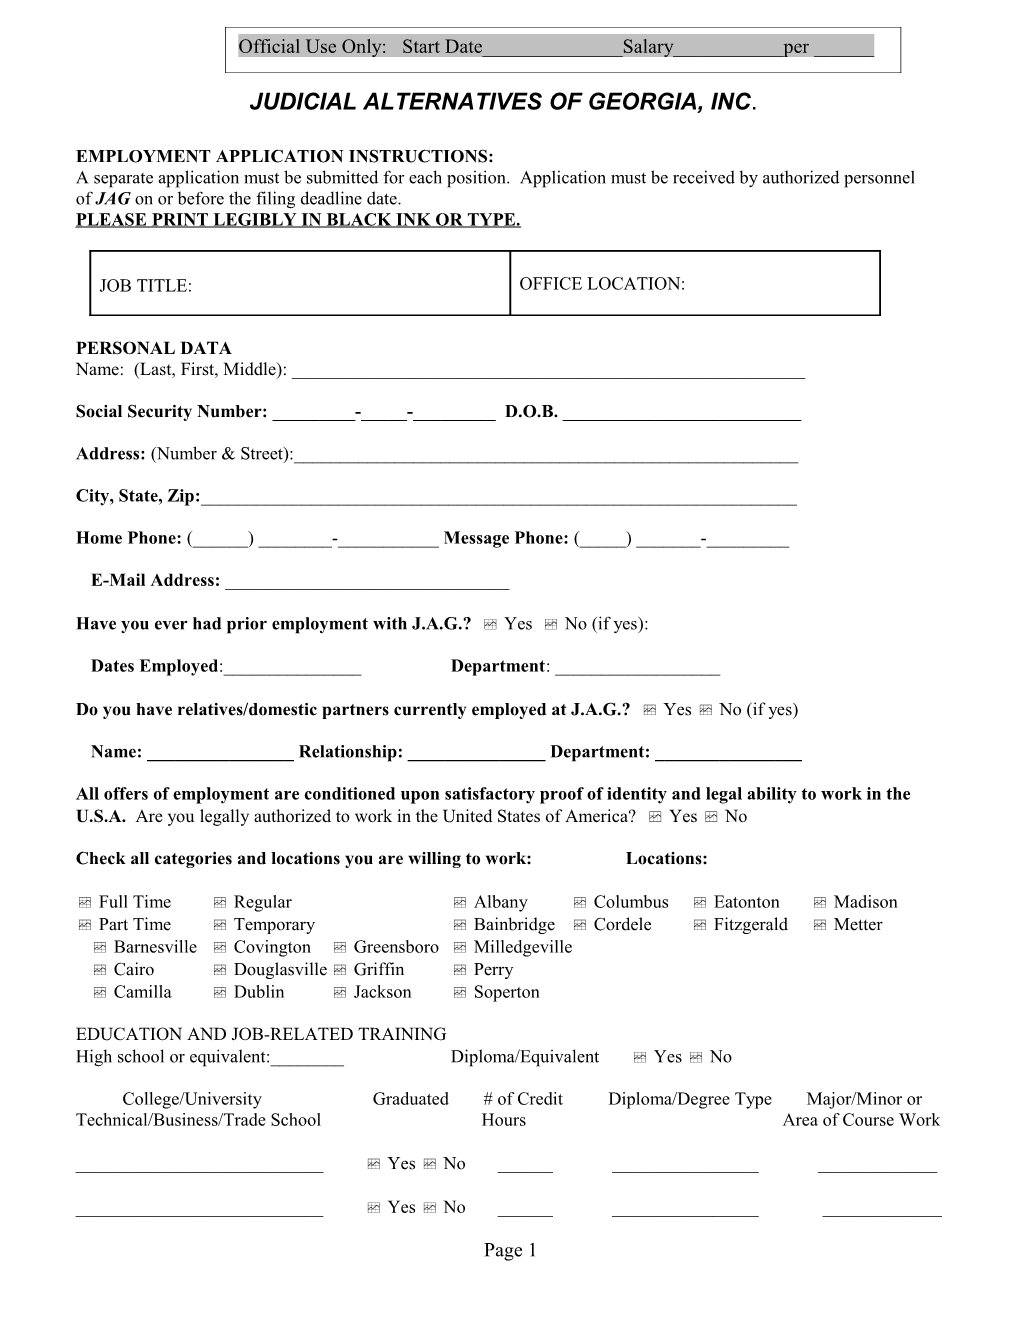 Employment Application Instructions s1